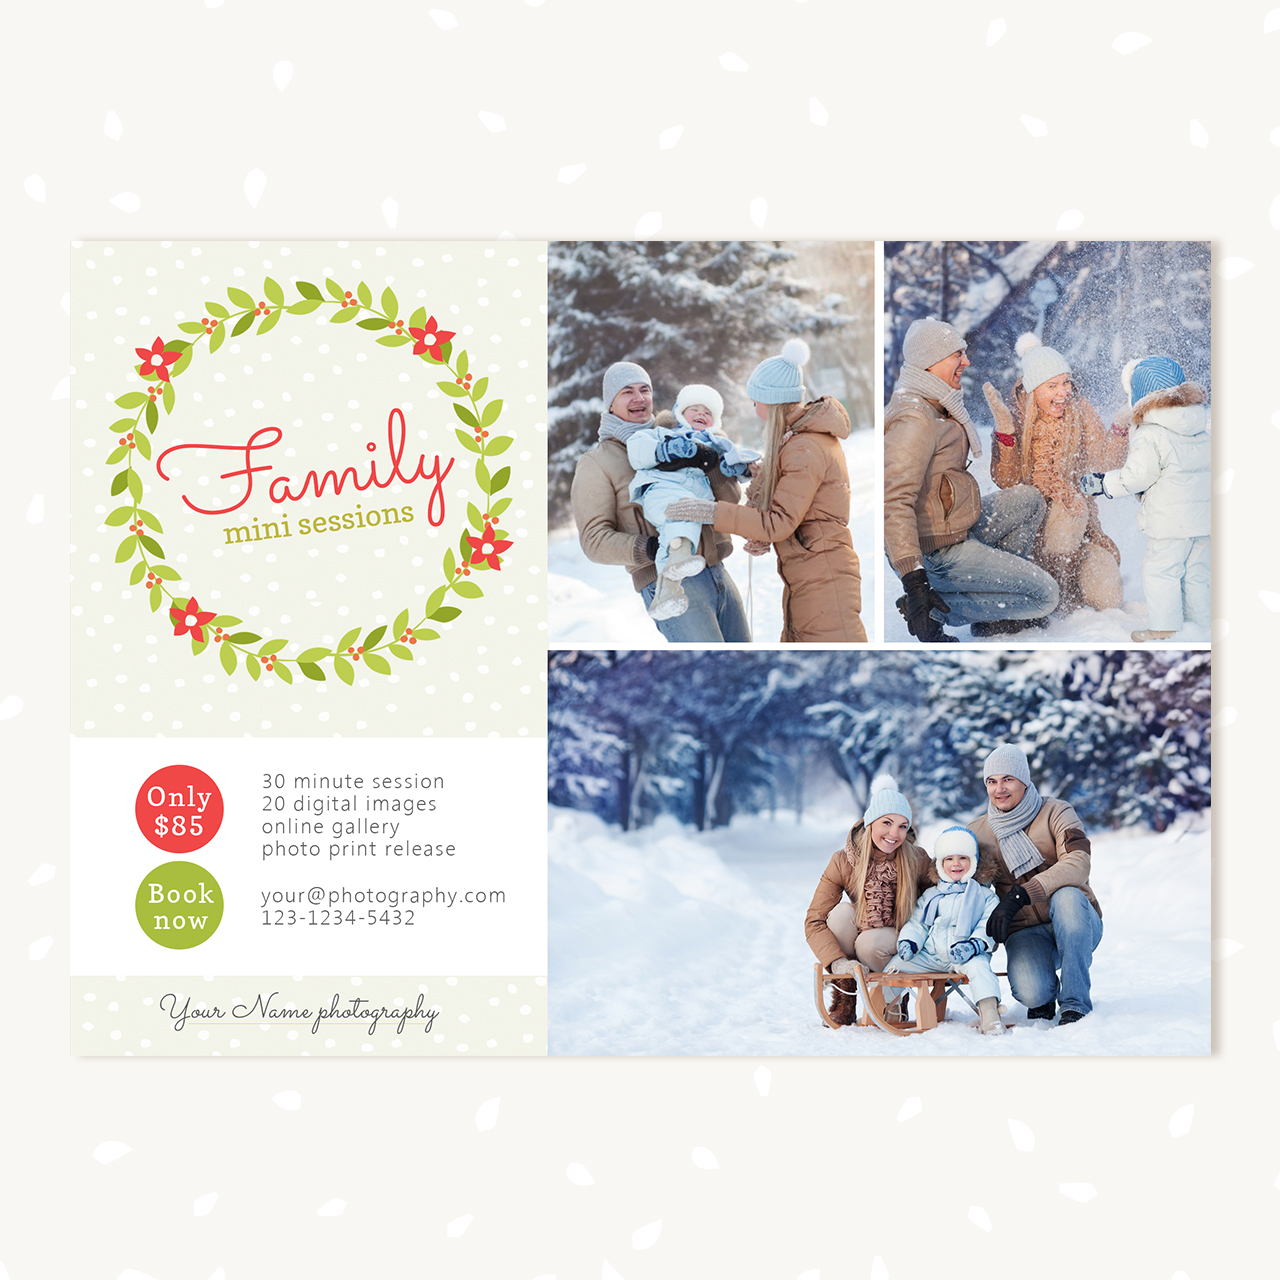 Family mini sessions template for Christmas